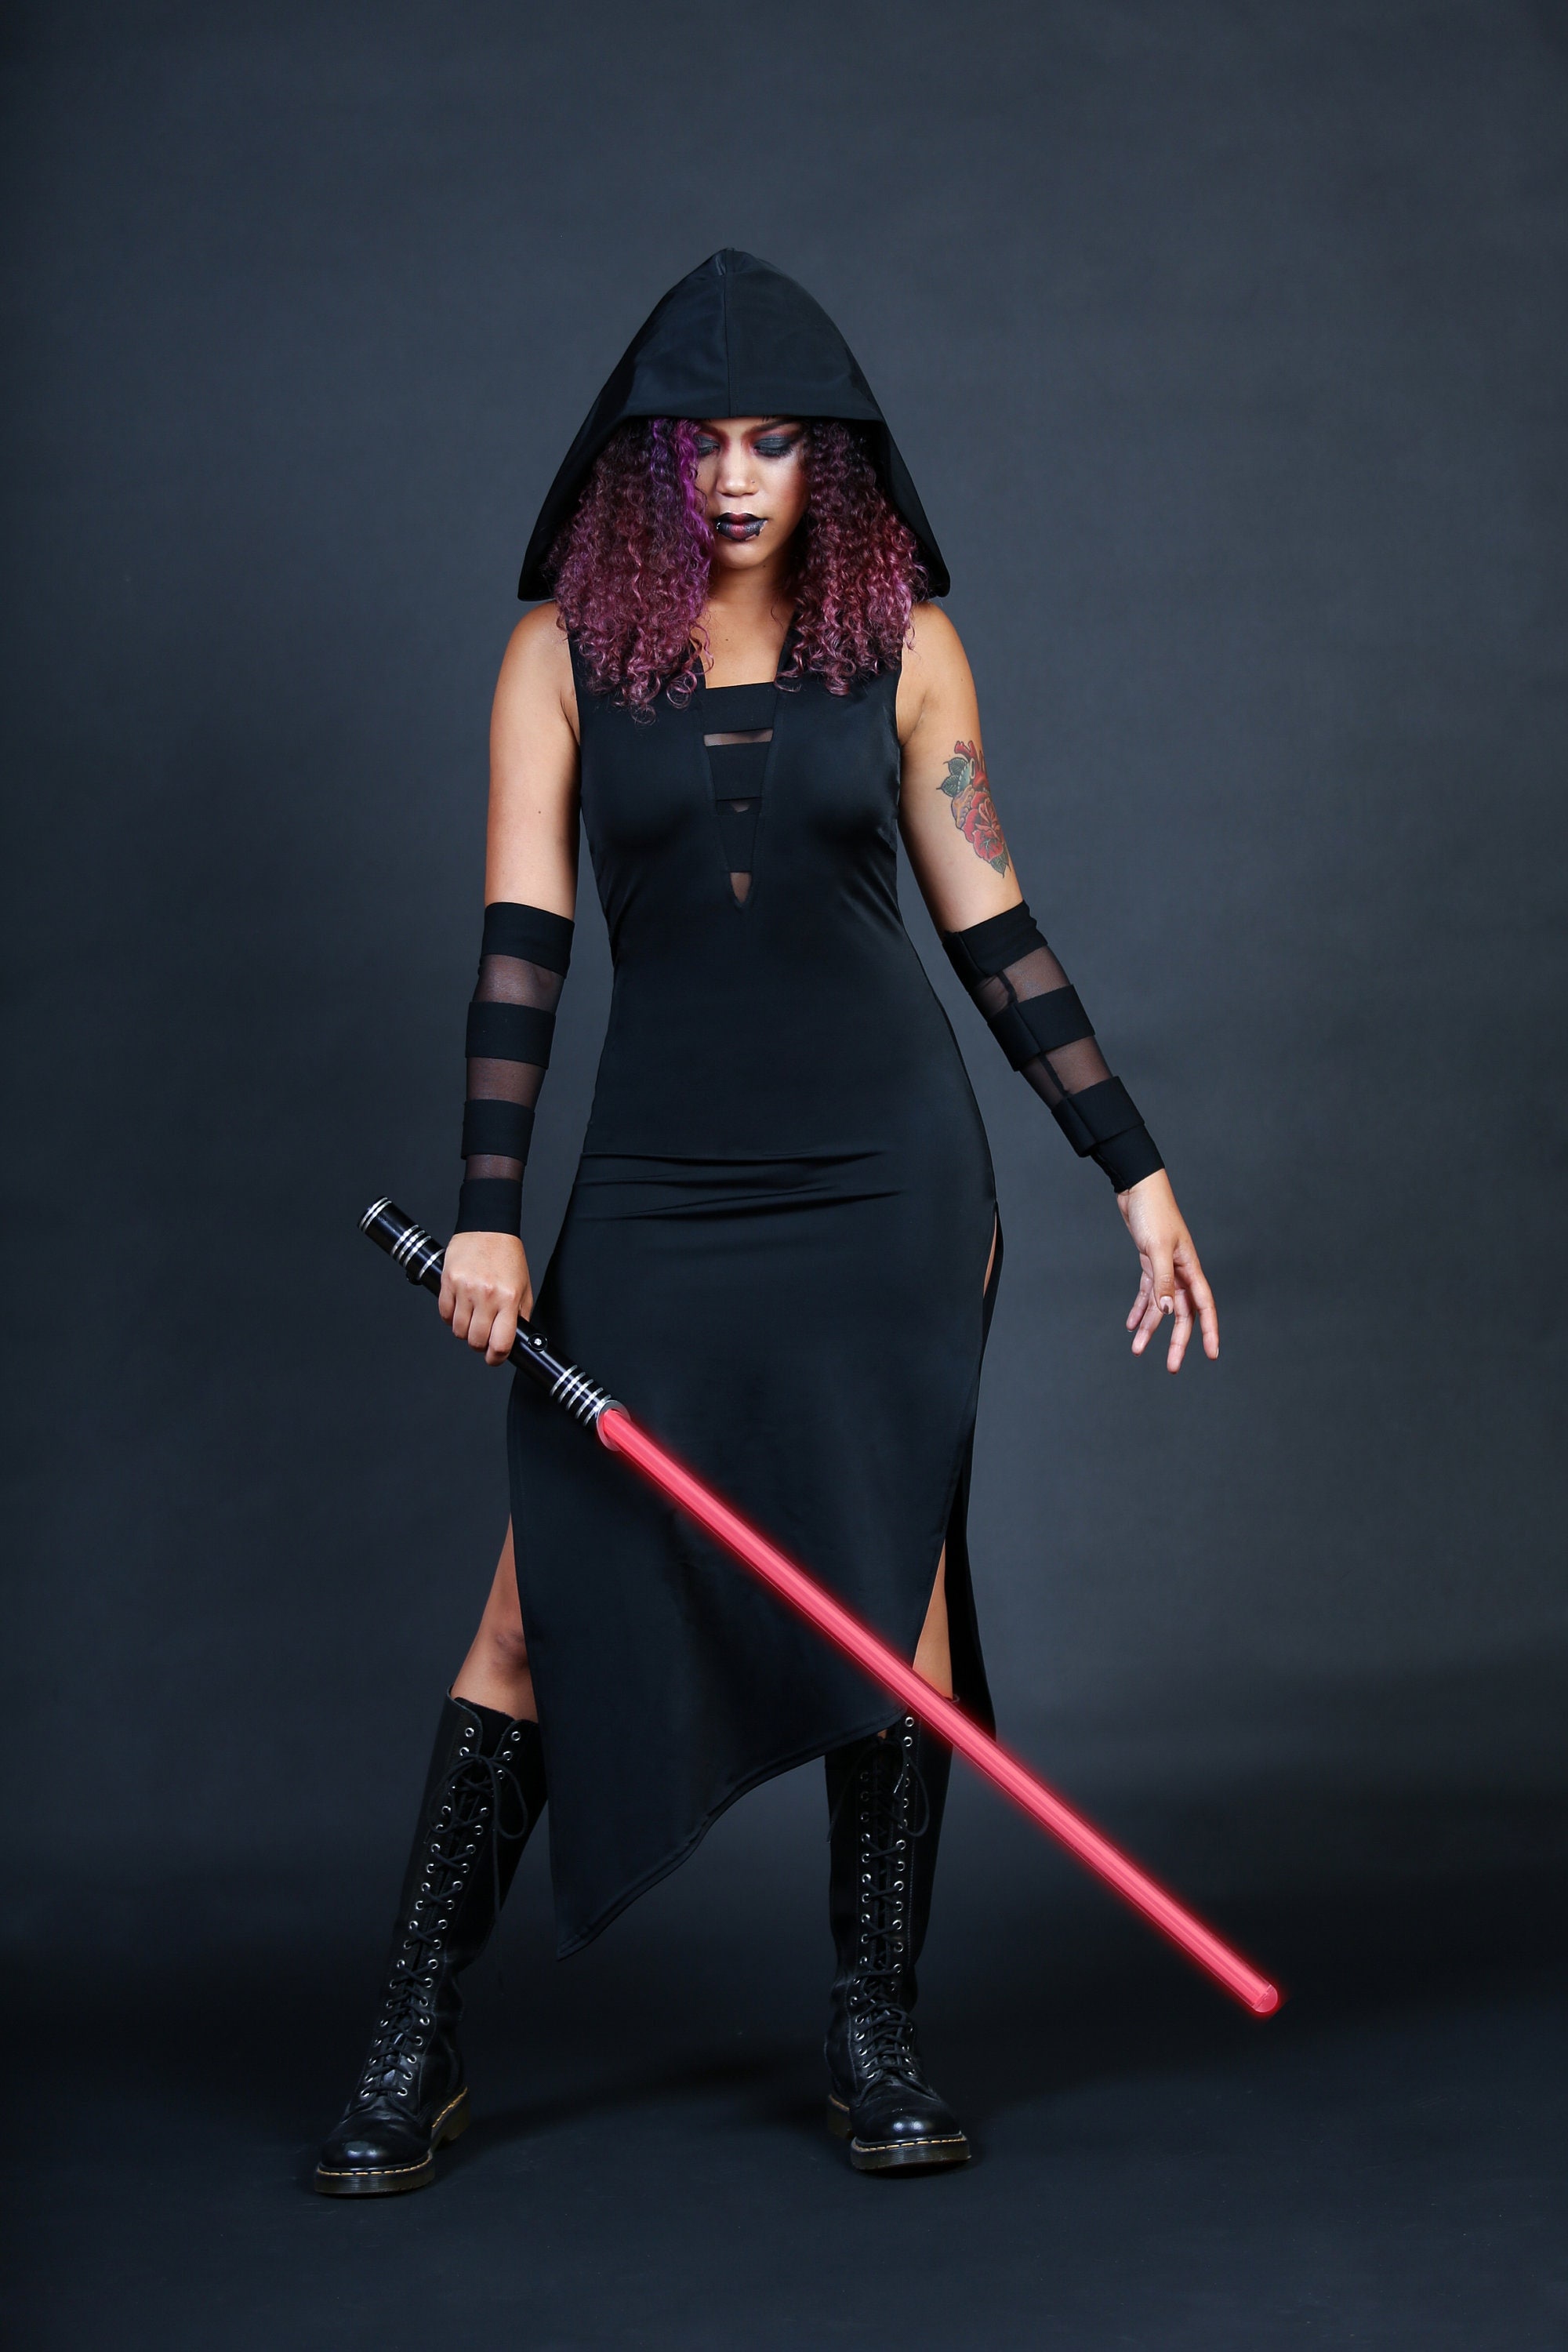 Sith lord sexy Top 10